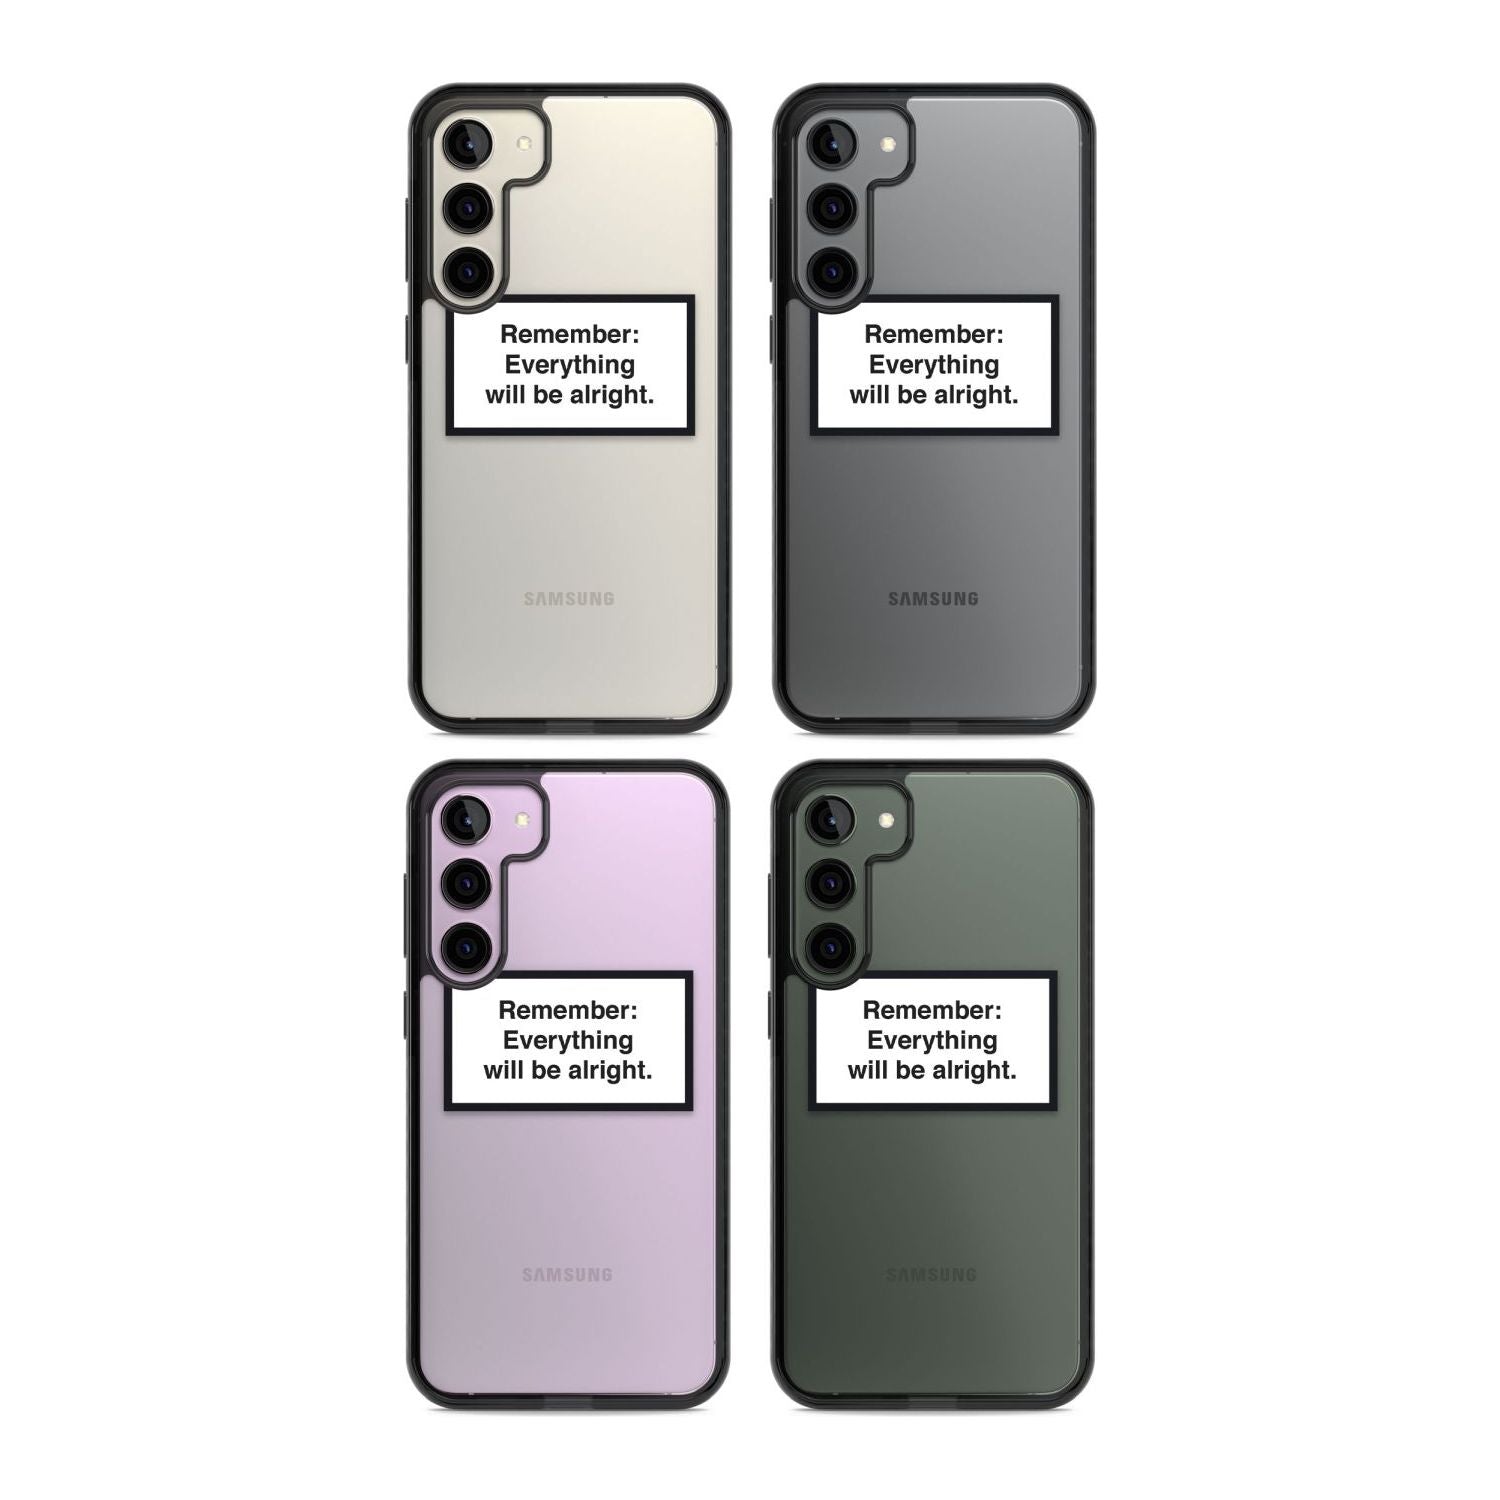 Everything Will Be Alright Phone Case iPhone 15 Pro Max / Black Impact Case,iPhone 15 Plus / Black Impact Case,iPhone 15 Pro / Black Impact Case,iPhone 15 / Black Impact Case,iPhone 15 Pro Max / Impact Case,iPhone 15 Plus / Impact Case,iPhone 15 Pro / Impact Case,iPhone 15 / Impact Case,iPhone 15 Pro Max / Magsafe Black Impact Case,iPhone 15 Plus / Magsafe Black Impact Case,iPhone 15 Pro / Magsafe Black Impact Case,iPhone 15 / Magsafe Black Impact Case,iPhone 14 Pro Max / Black Impact Case,iPhone 14 Plus / 